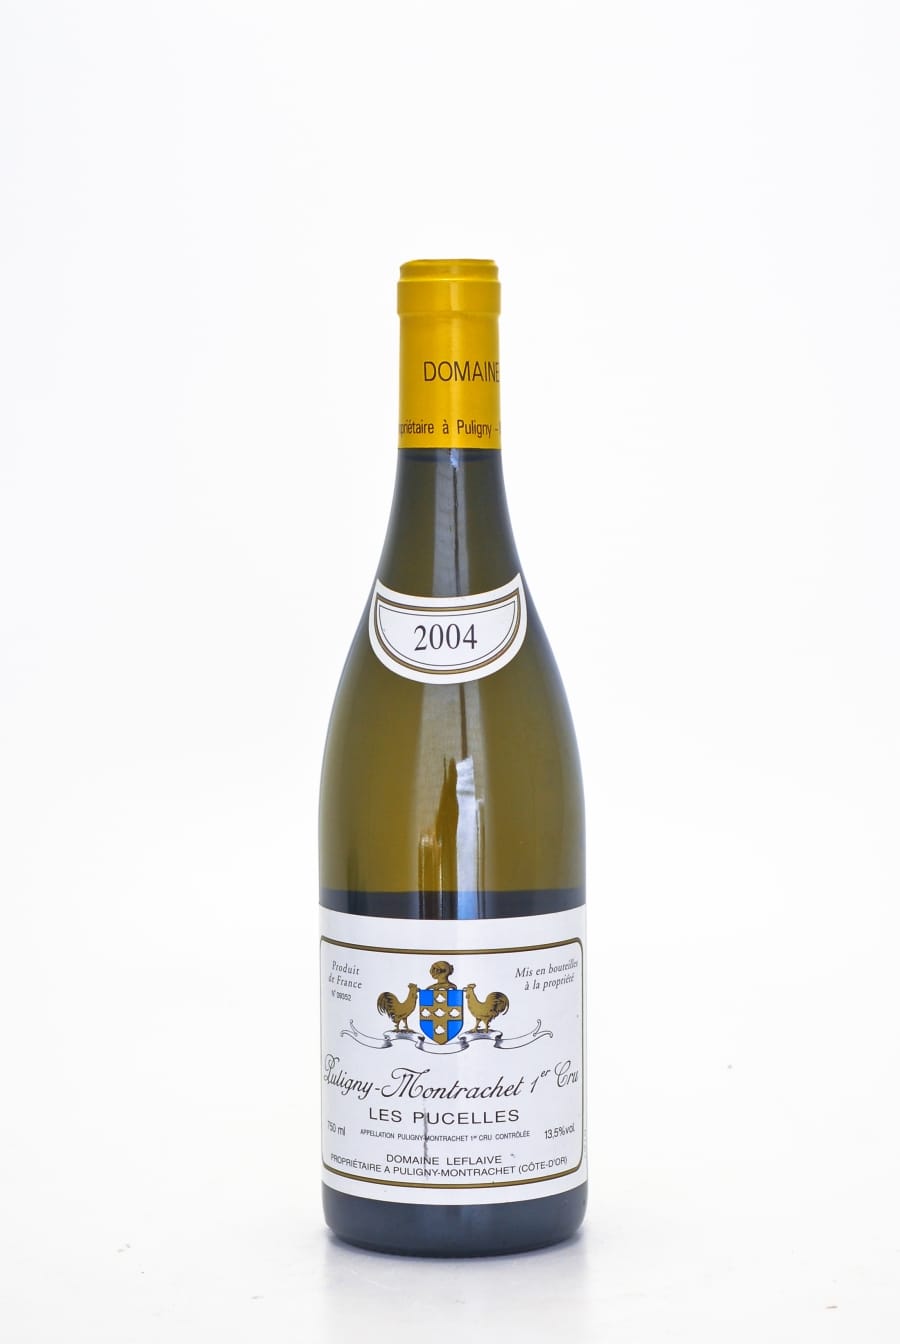 Domaine Leflaive - Puligny Montrachet Pucelles 2004 From Original Wooden Case